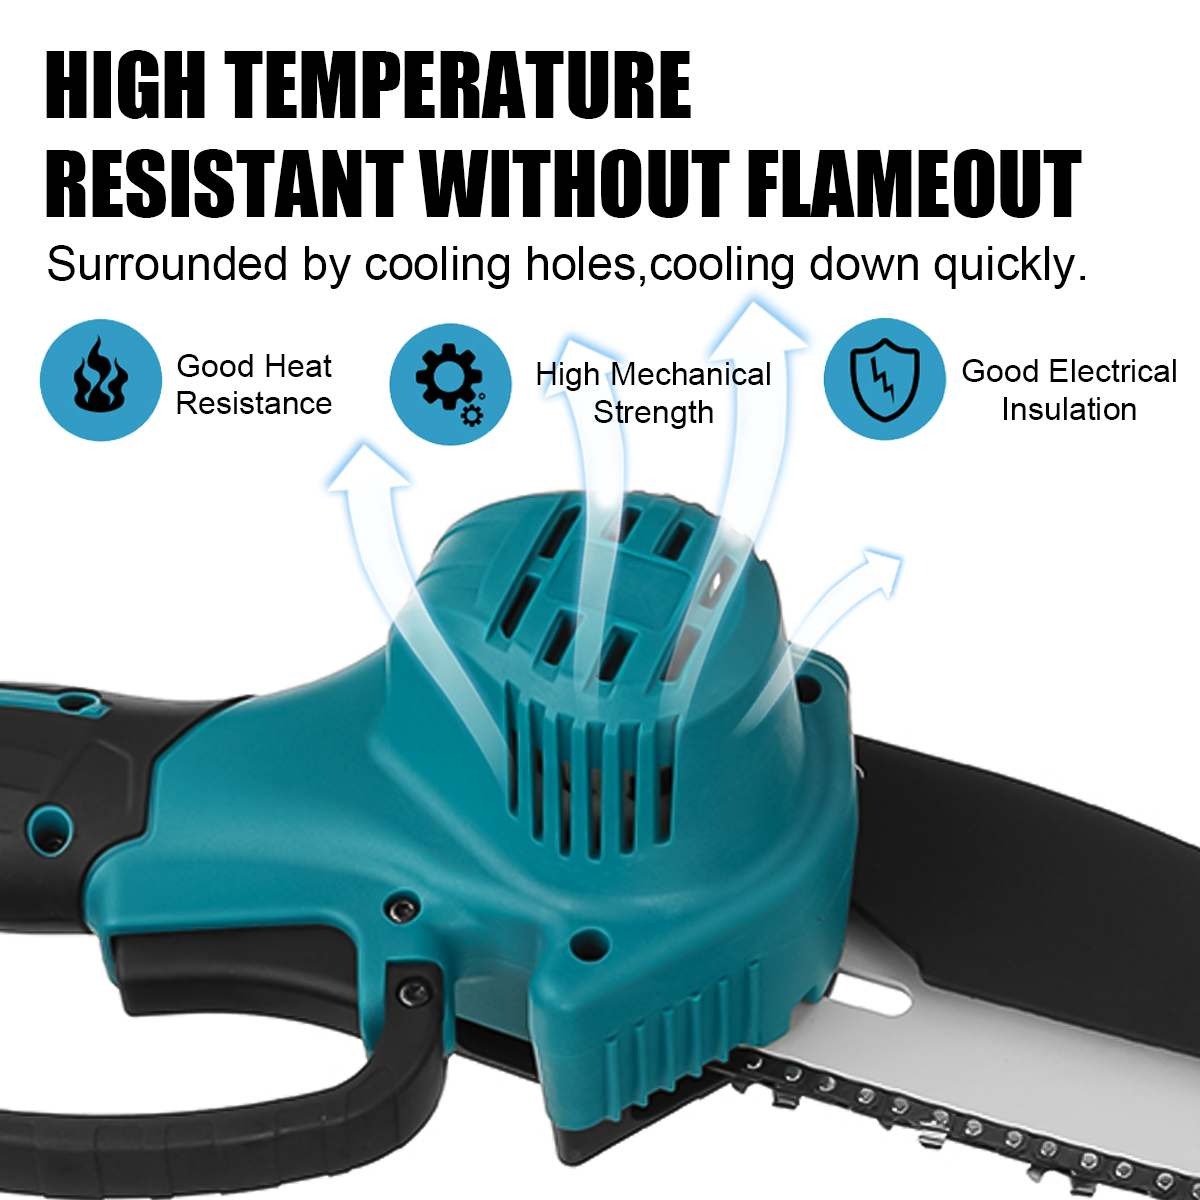 5 brushless electric chain saw 88 vf 8 inch description 8